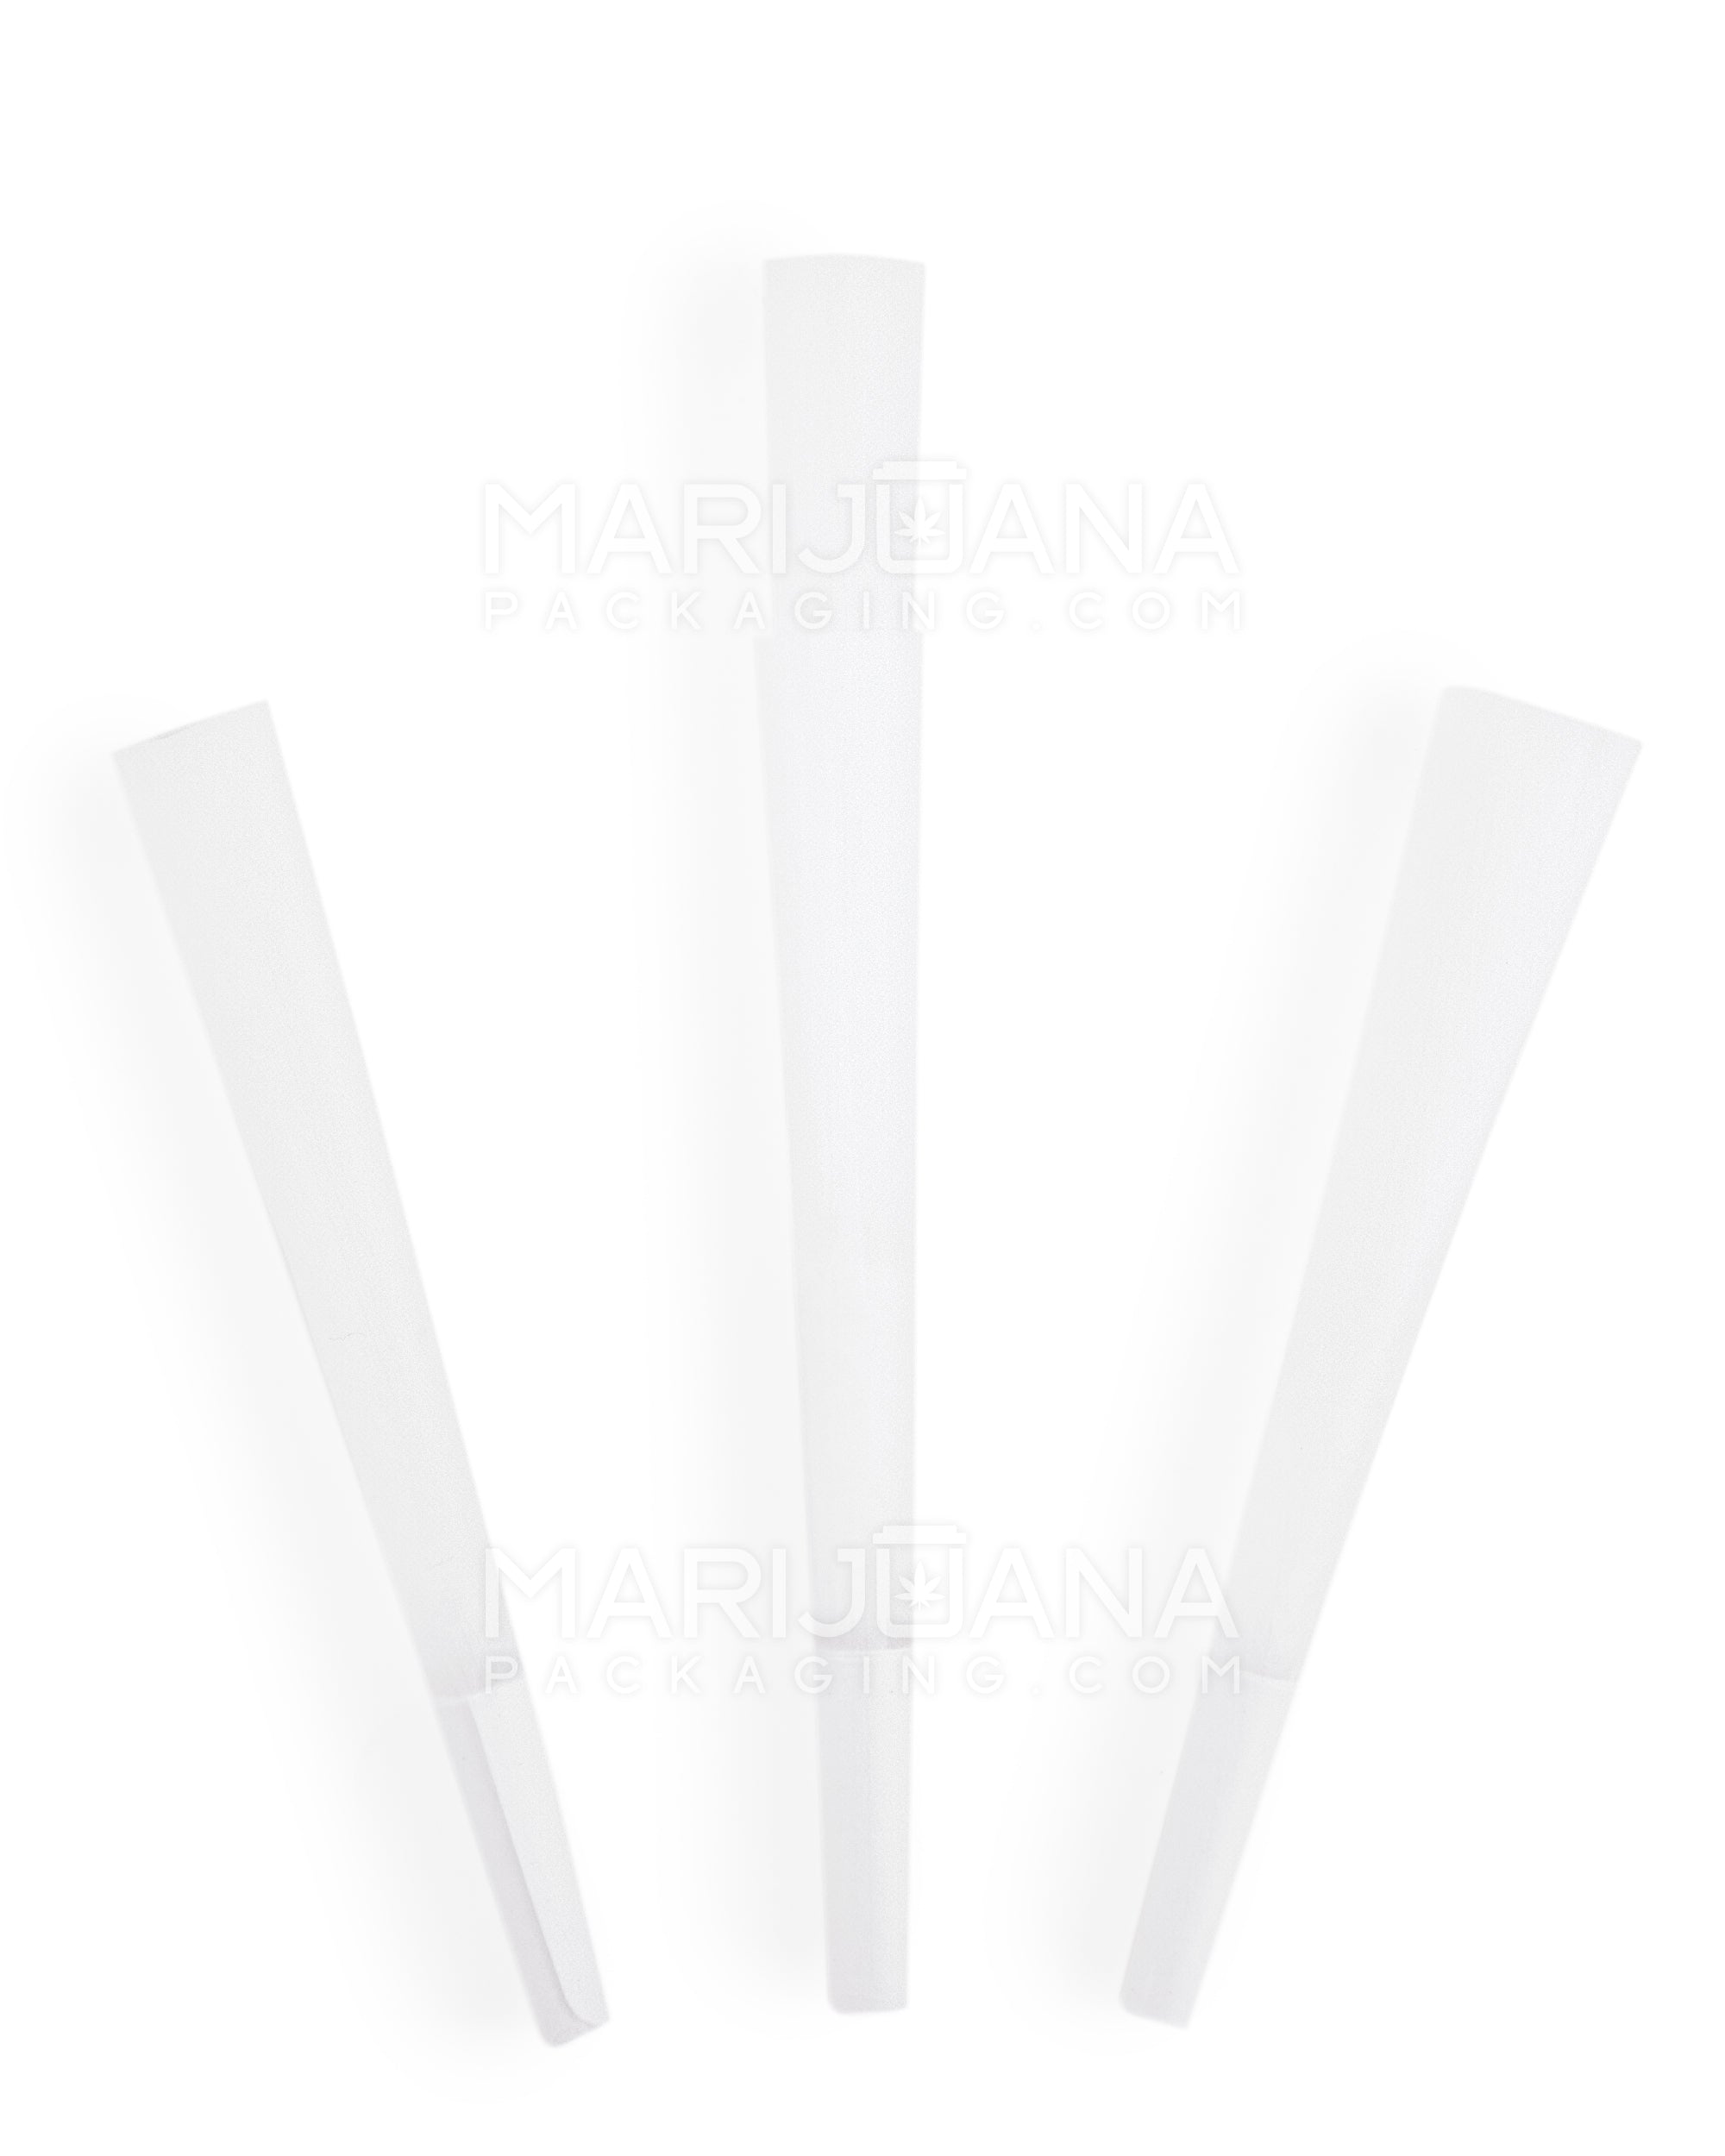 CONES + SUPPLY | 98 Luxe Pre-Rolled Cones | 98mm - Classic White Paper - 800 Count - 4